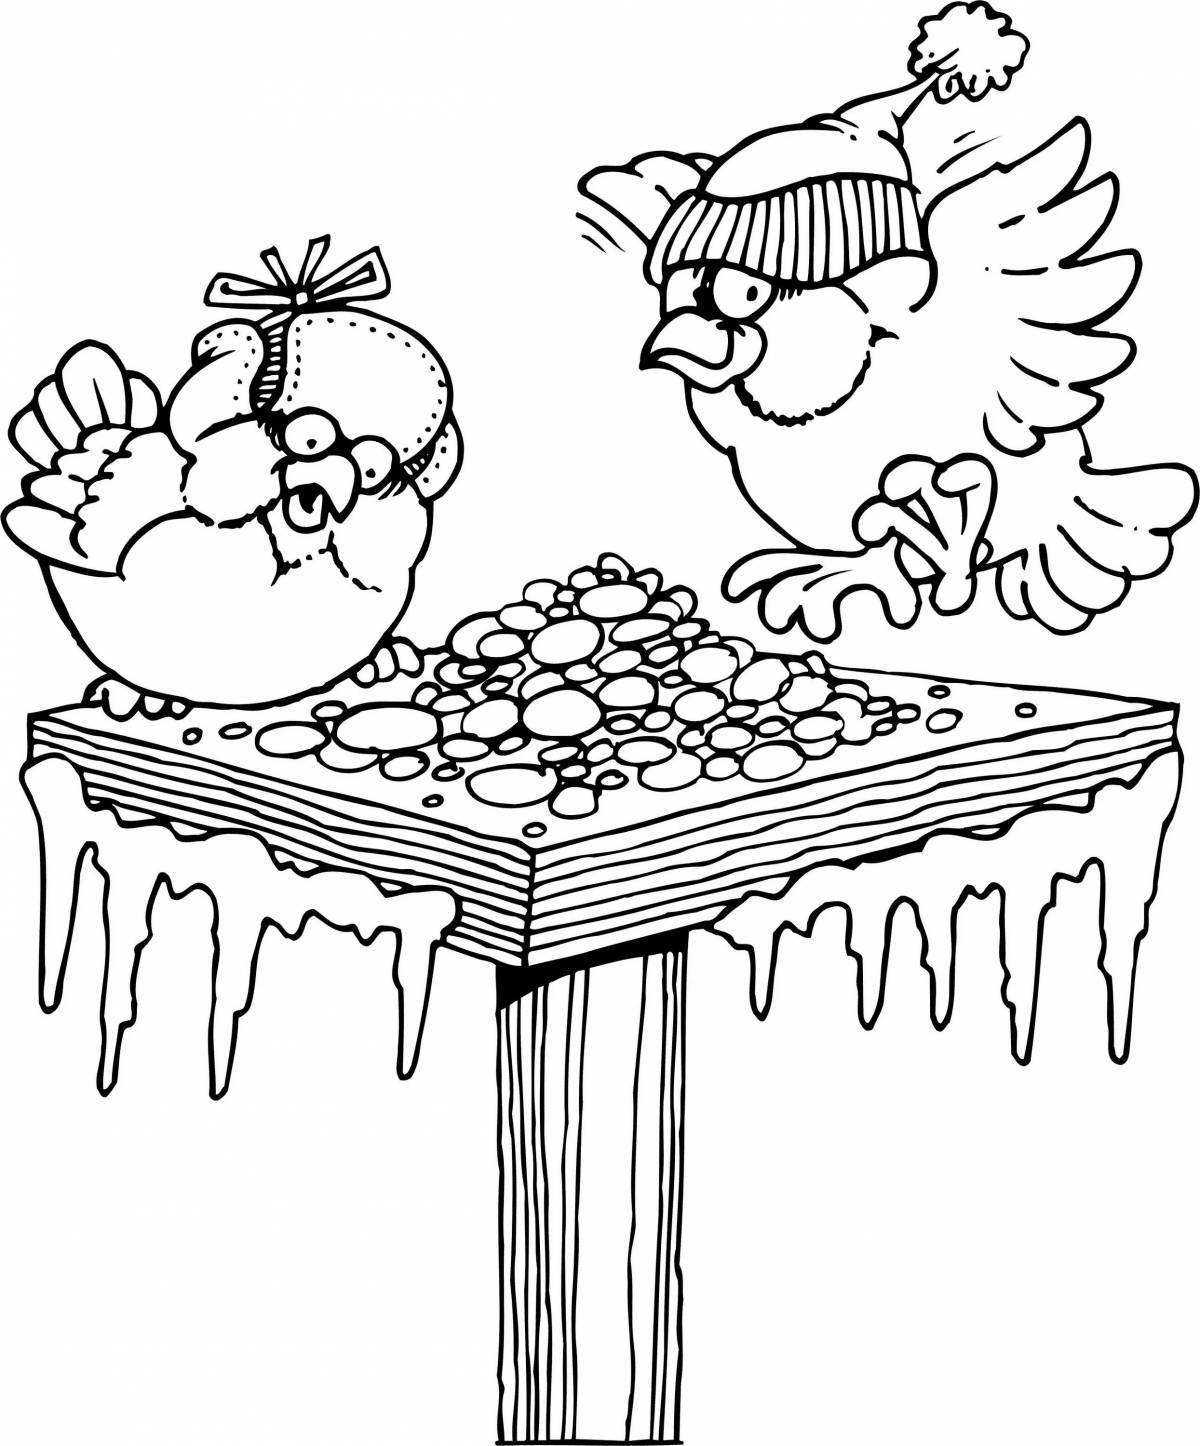 Radiant coloring page: how to help birds in winter